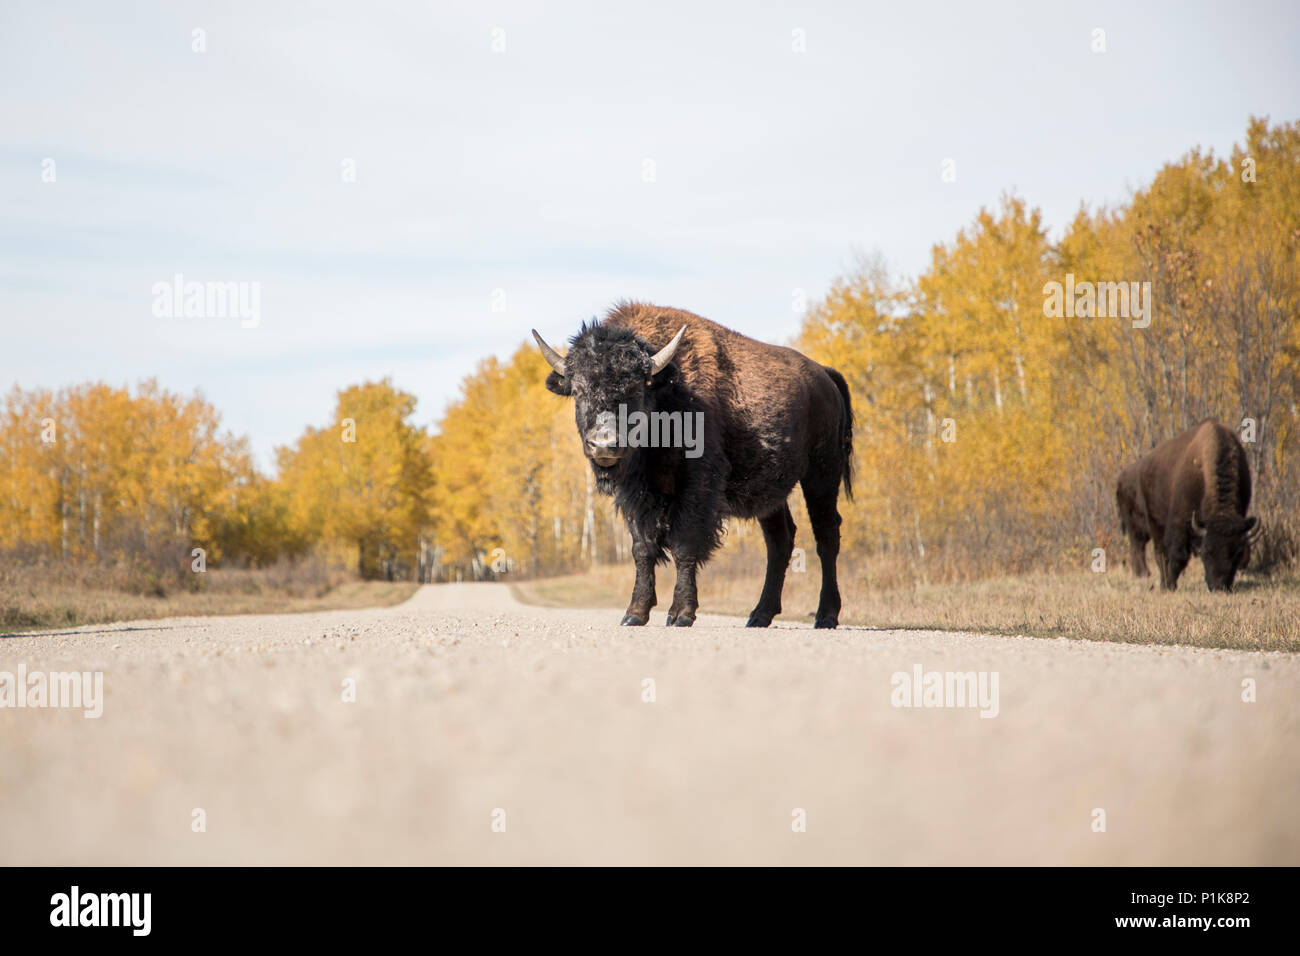 Buffalo standing in the road in a forest, Canada Stock Photo